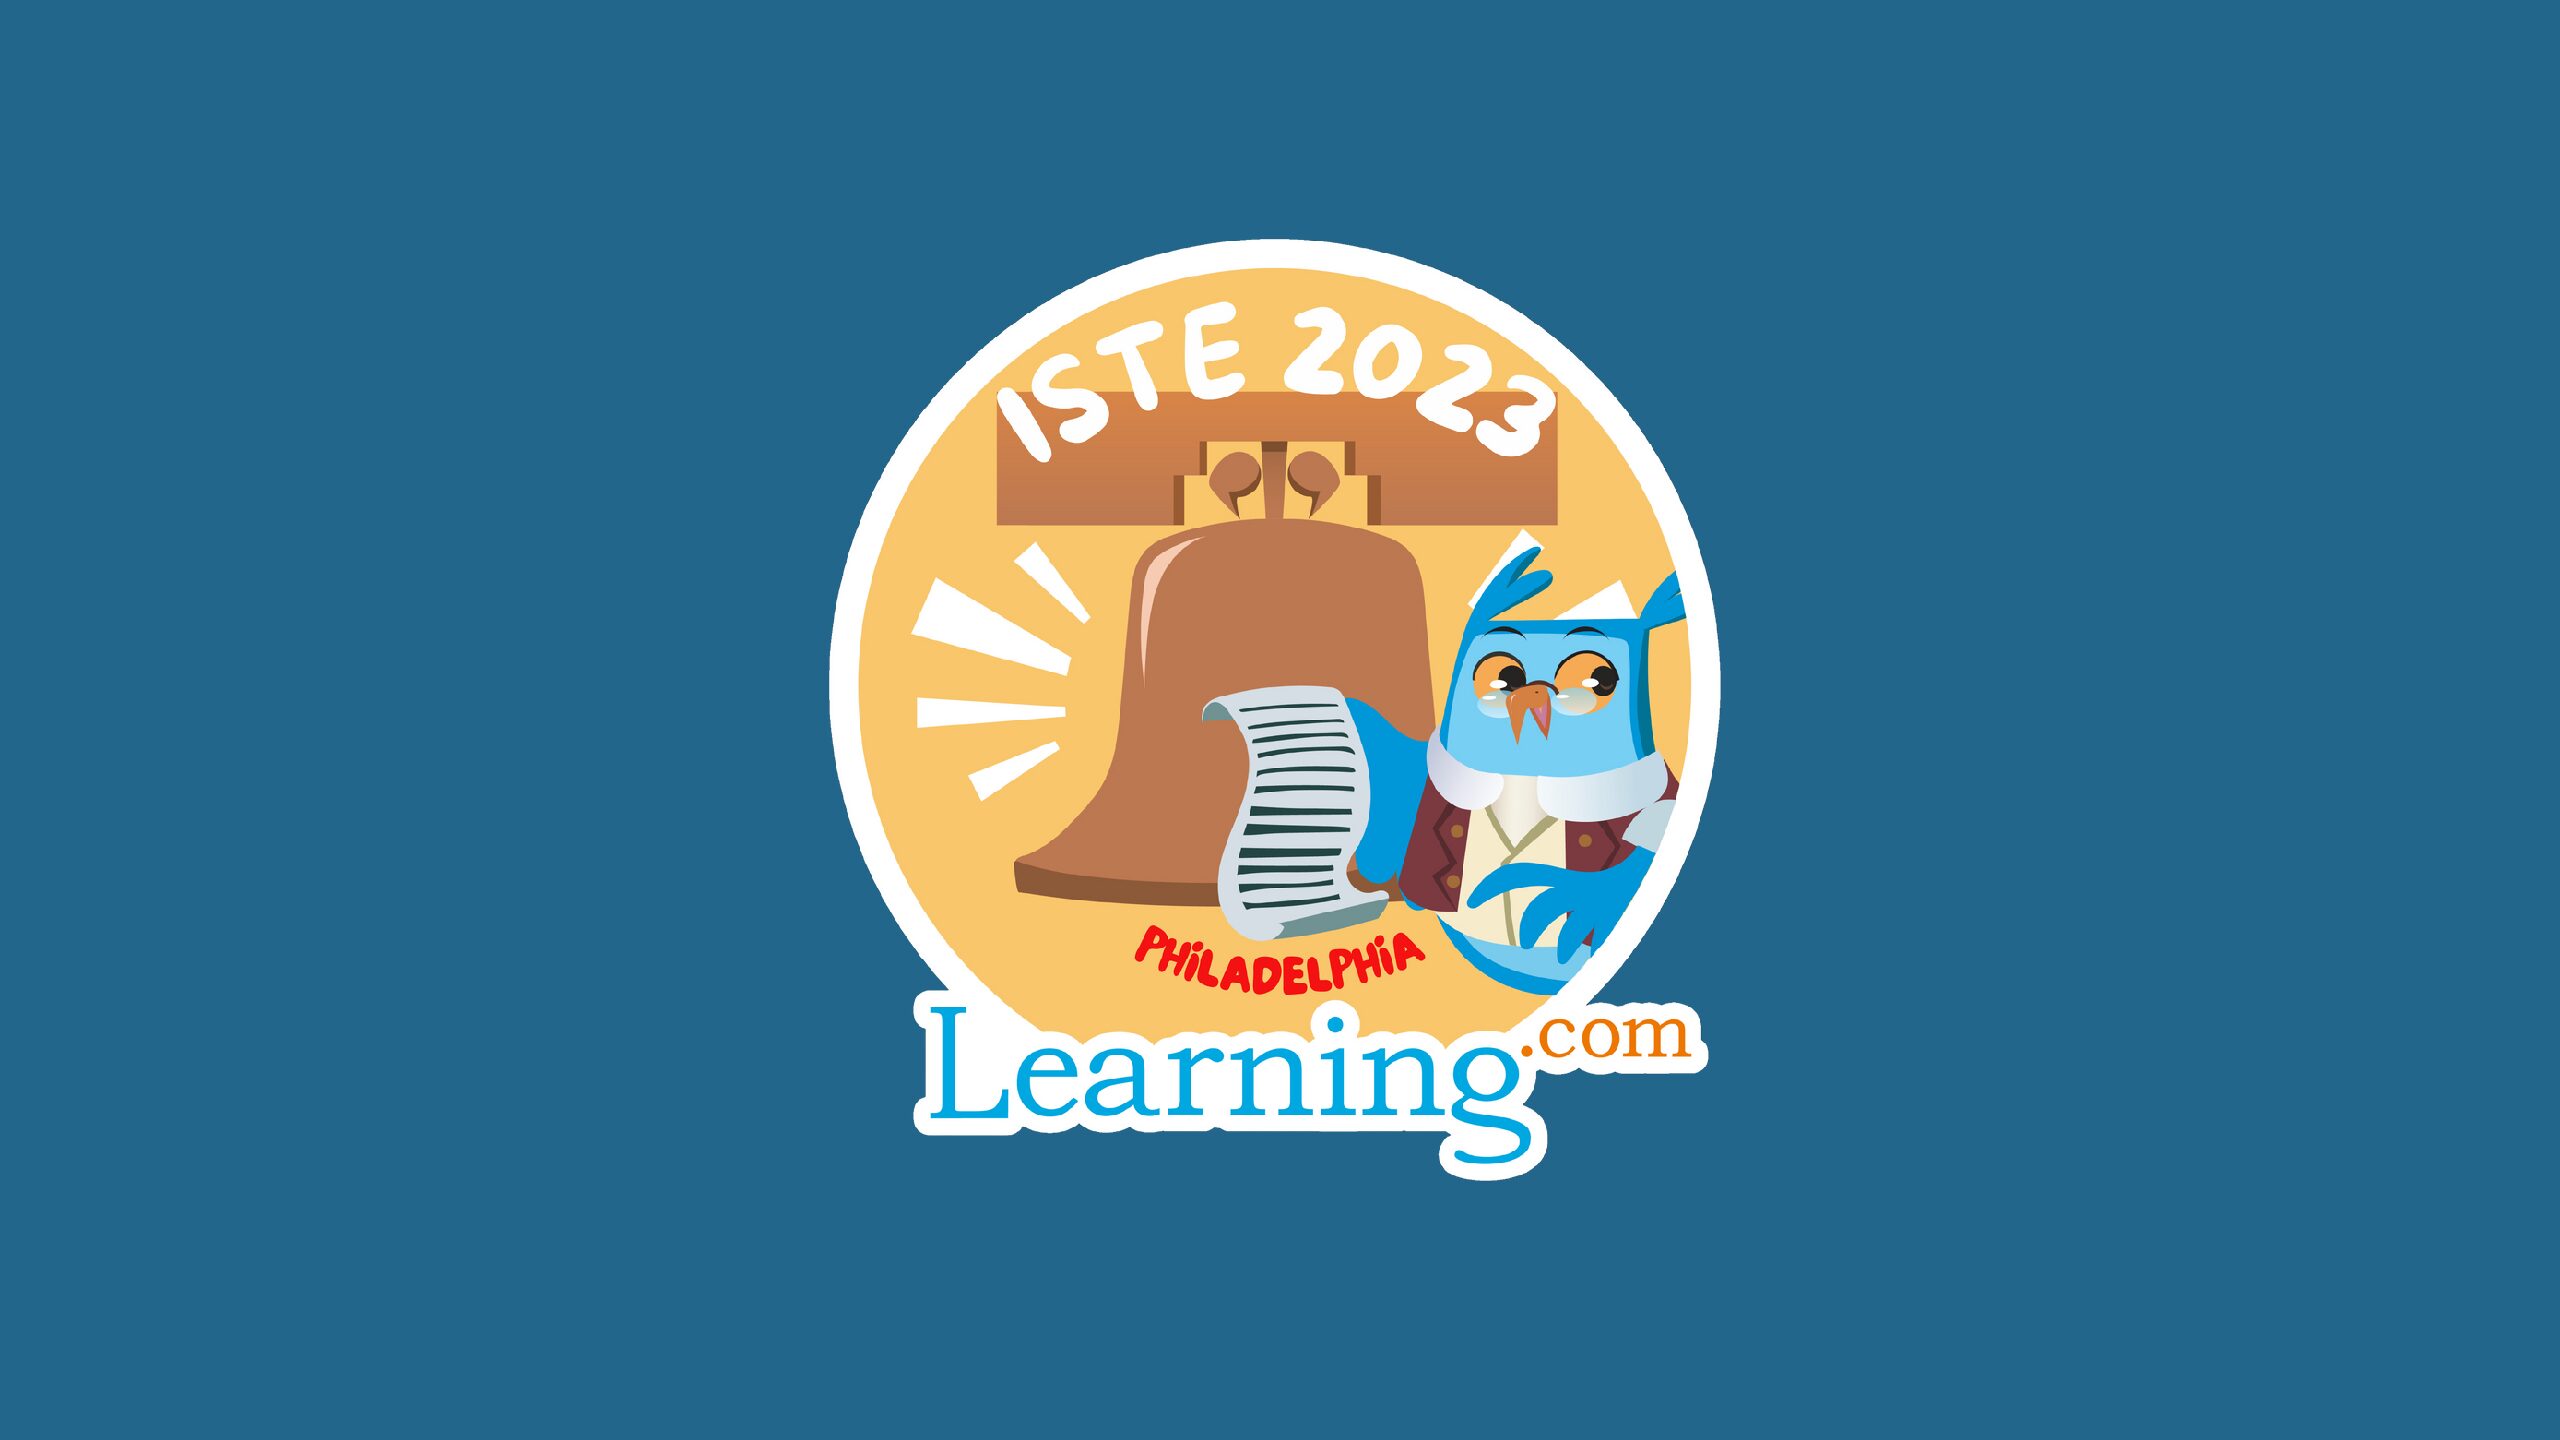 Everything You Need to Get Ready for ISTELive 2023